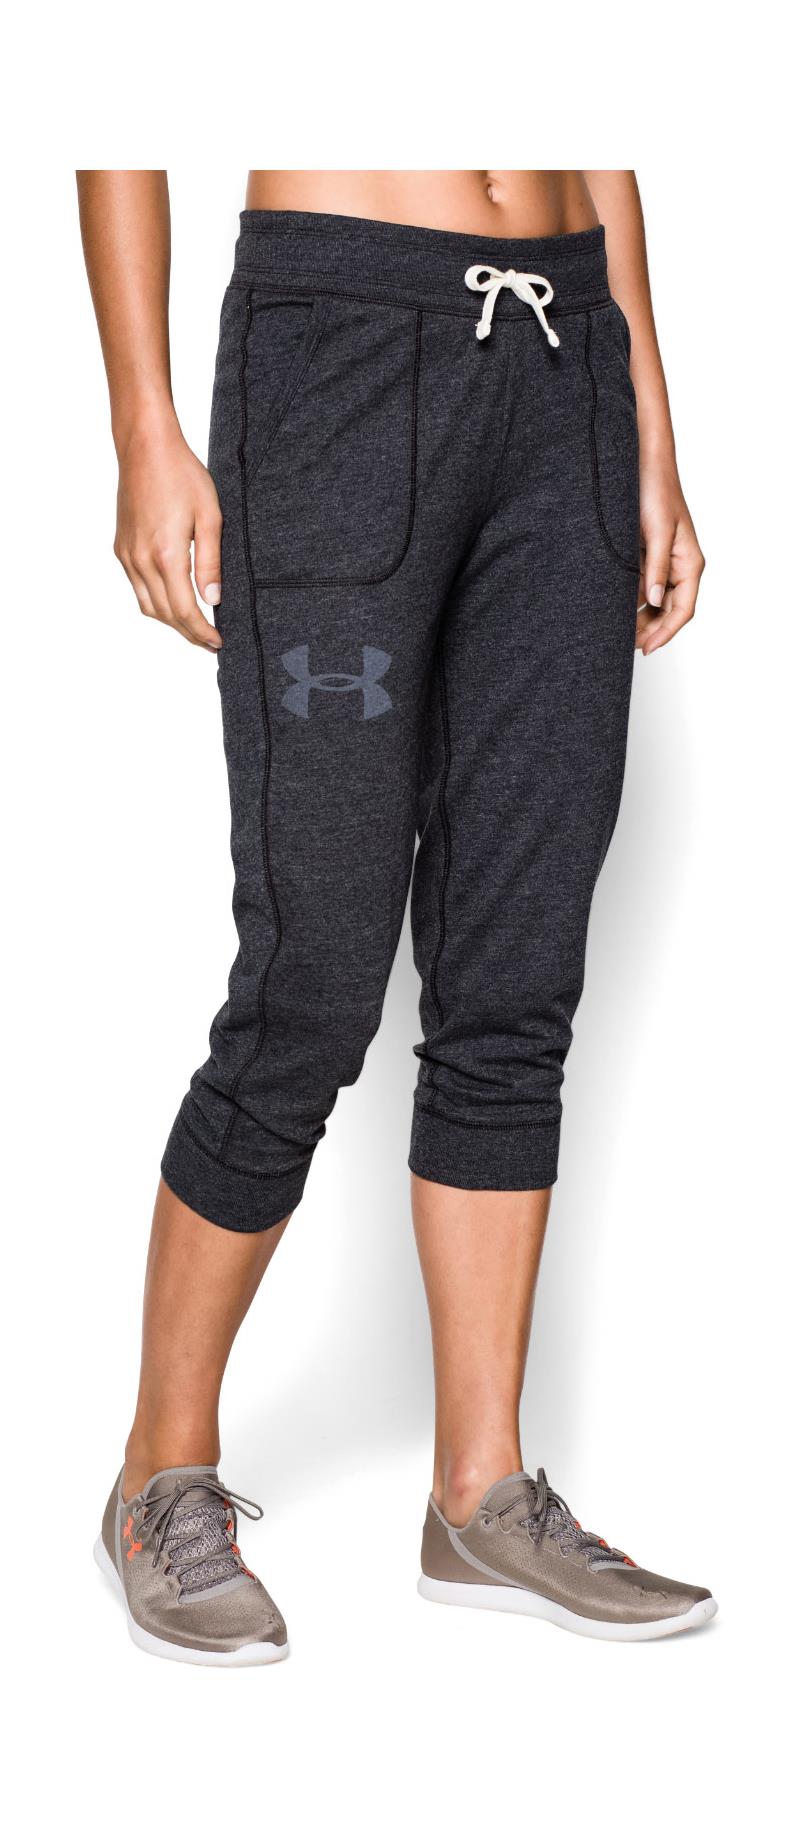 Under Armour Womens Charged Cotton Tri-Blend Capri Leggings OutdoorGB